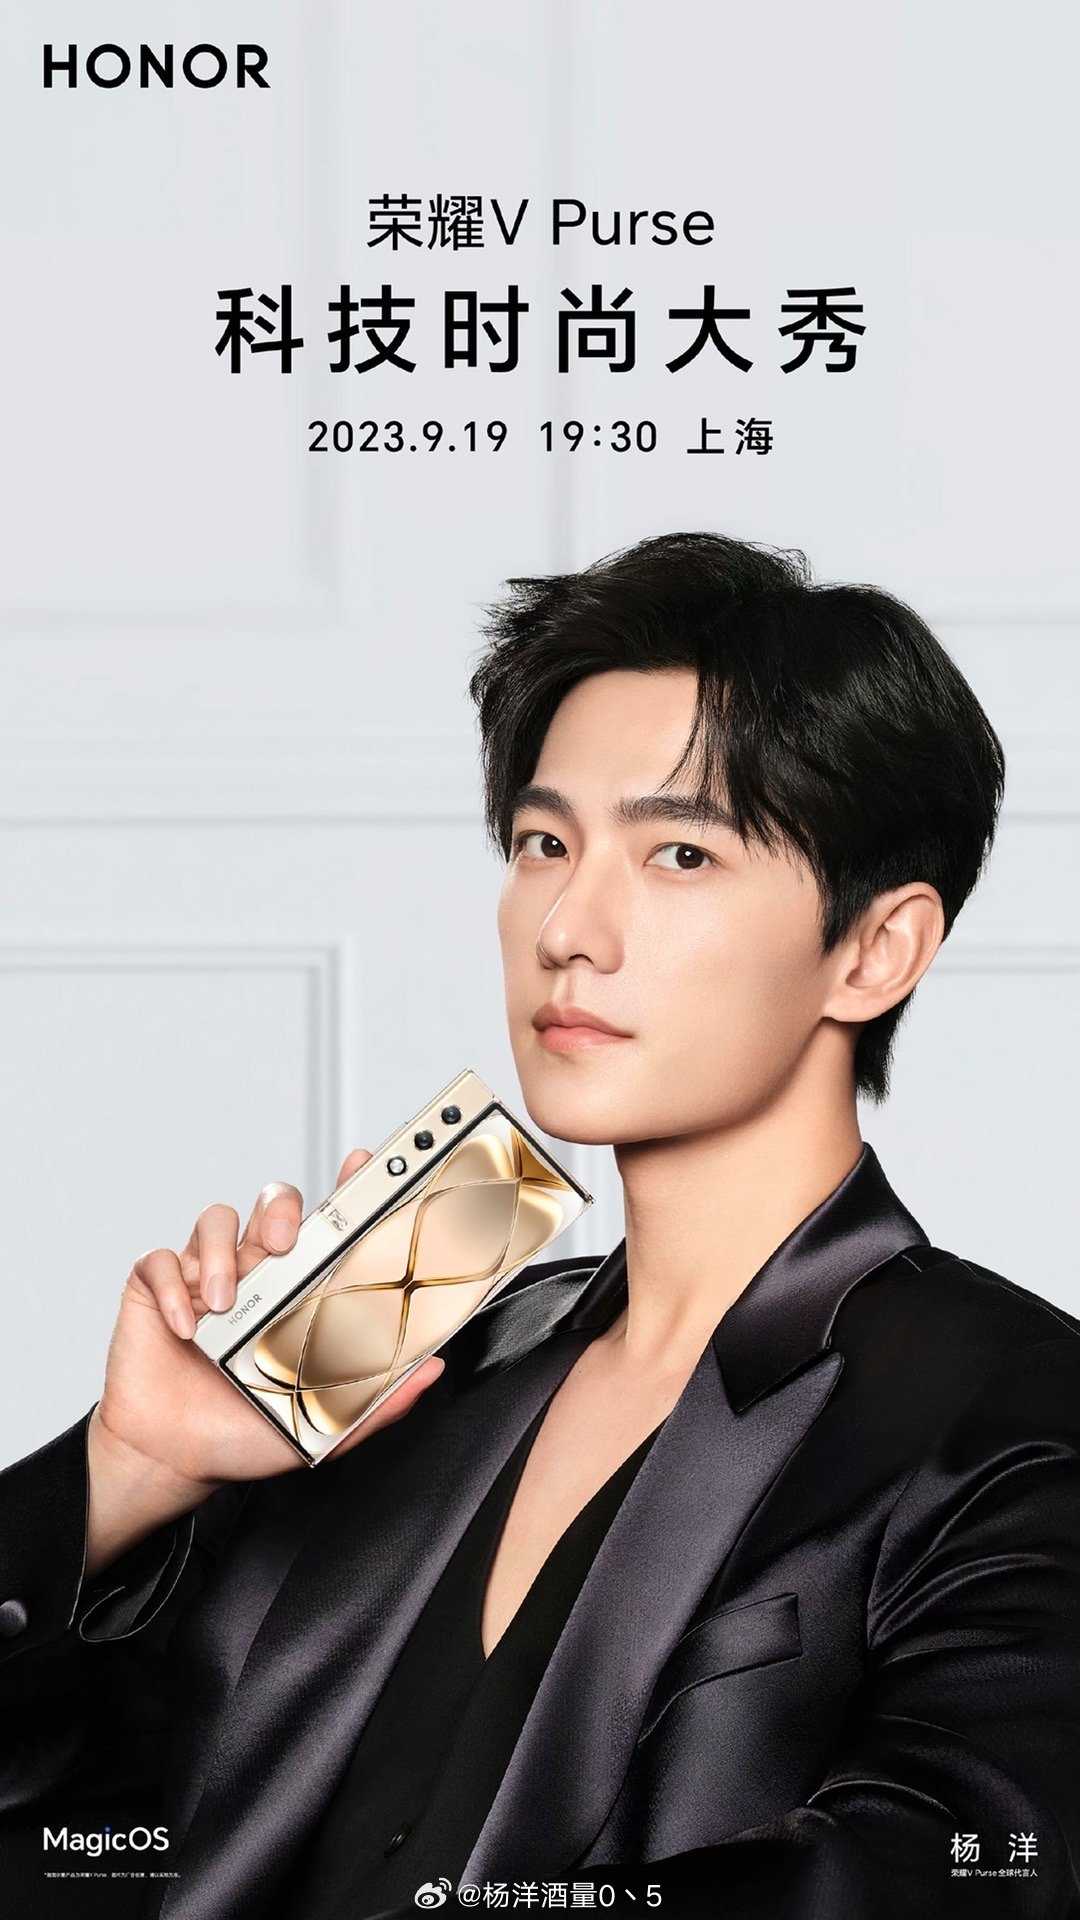 Honor to introduce V Purse in China on September 19